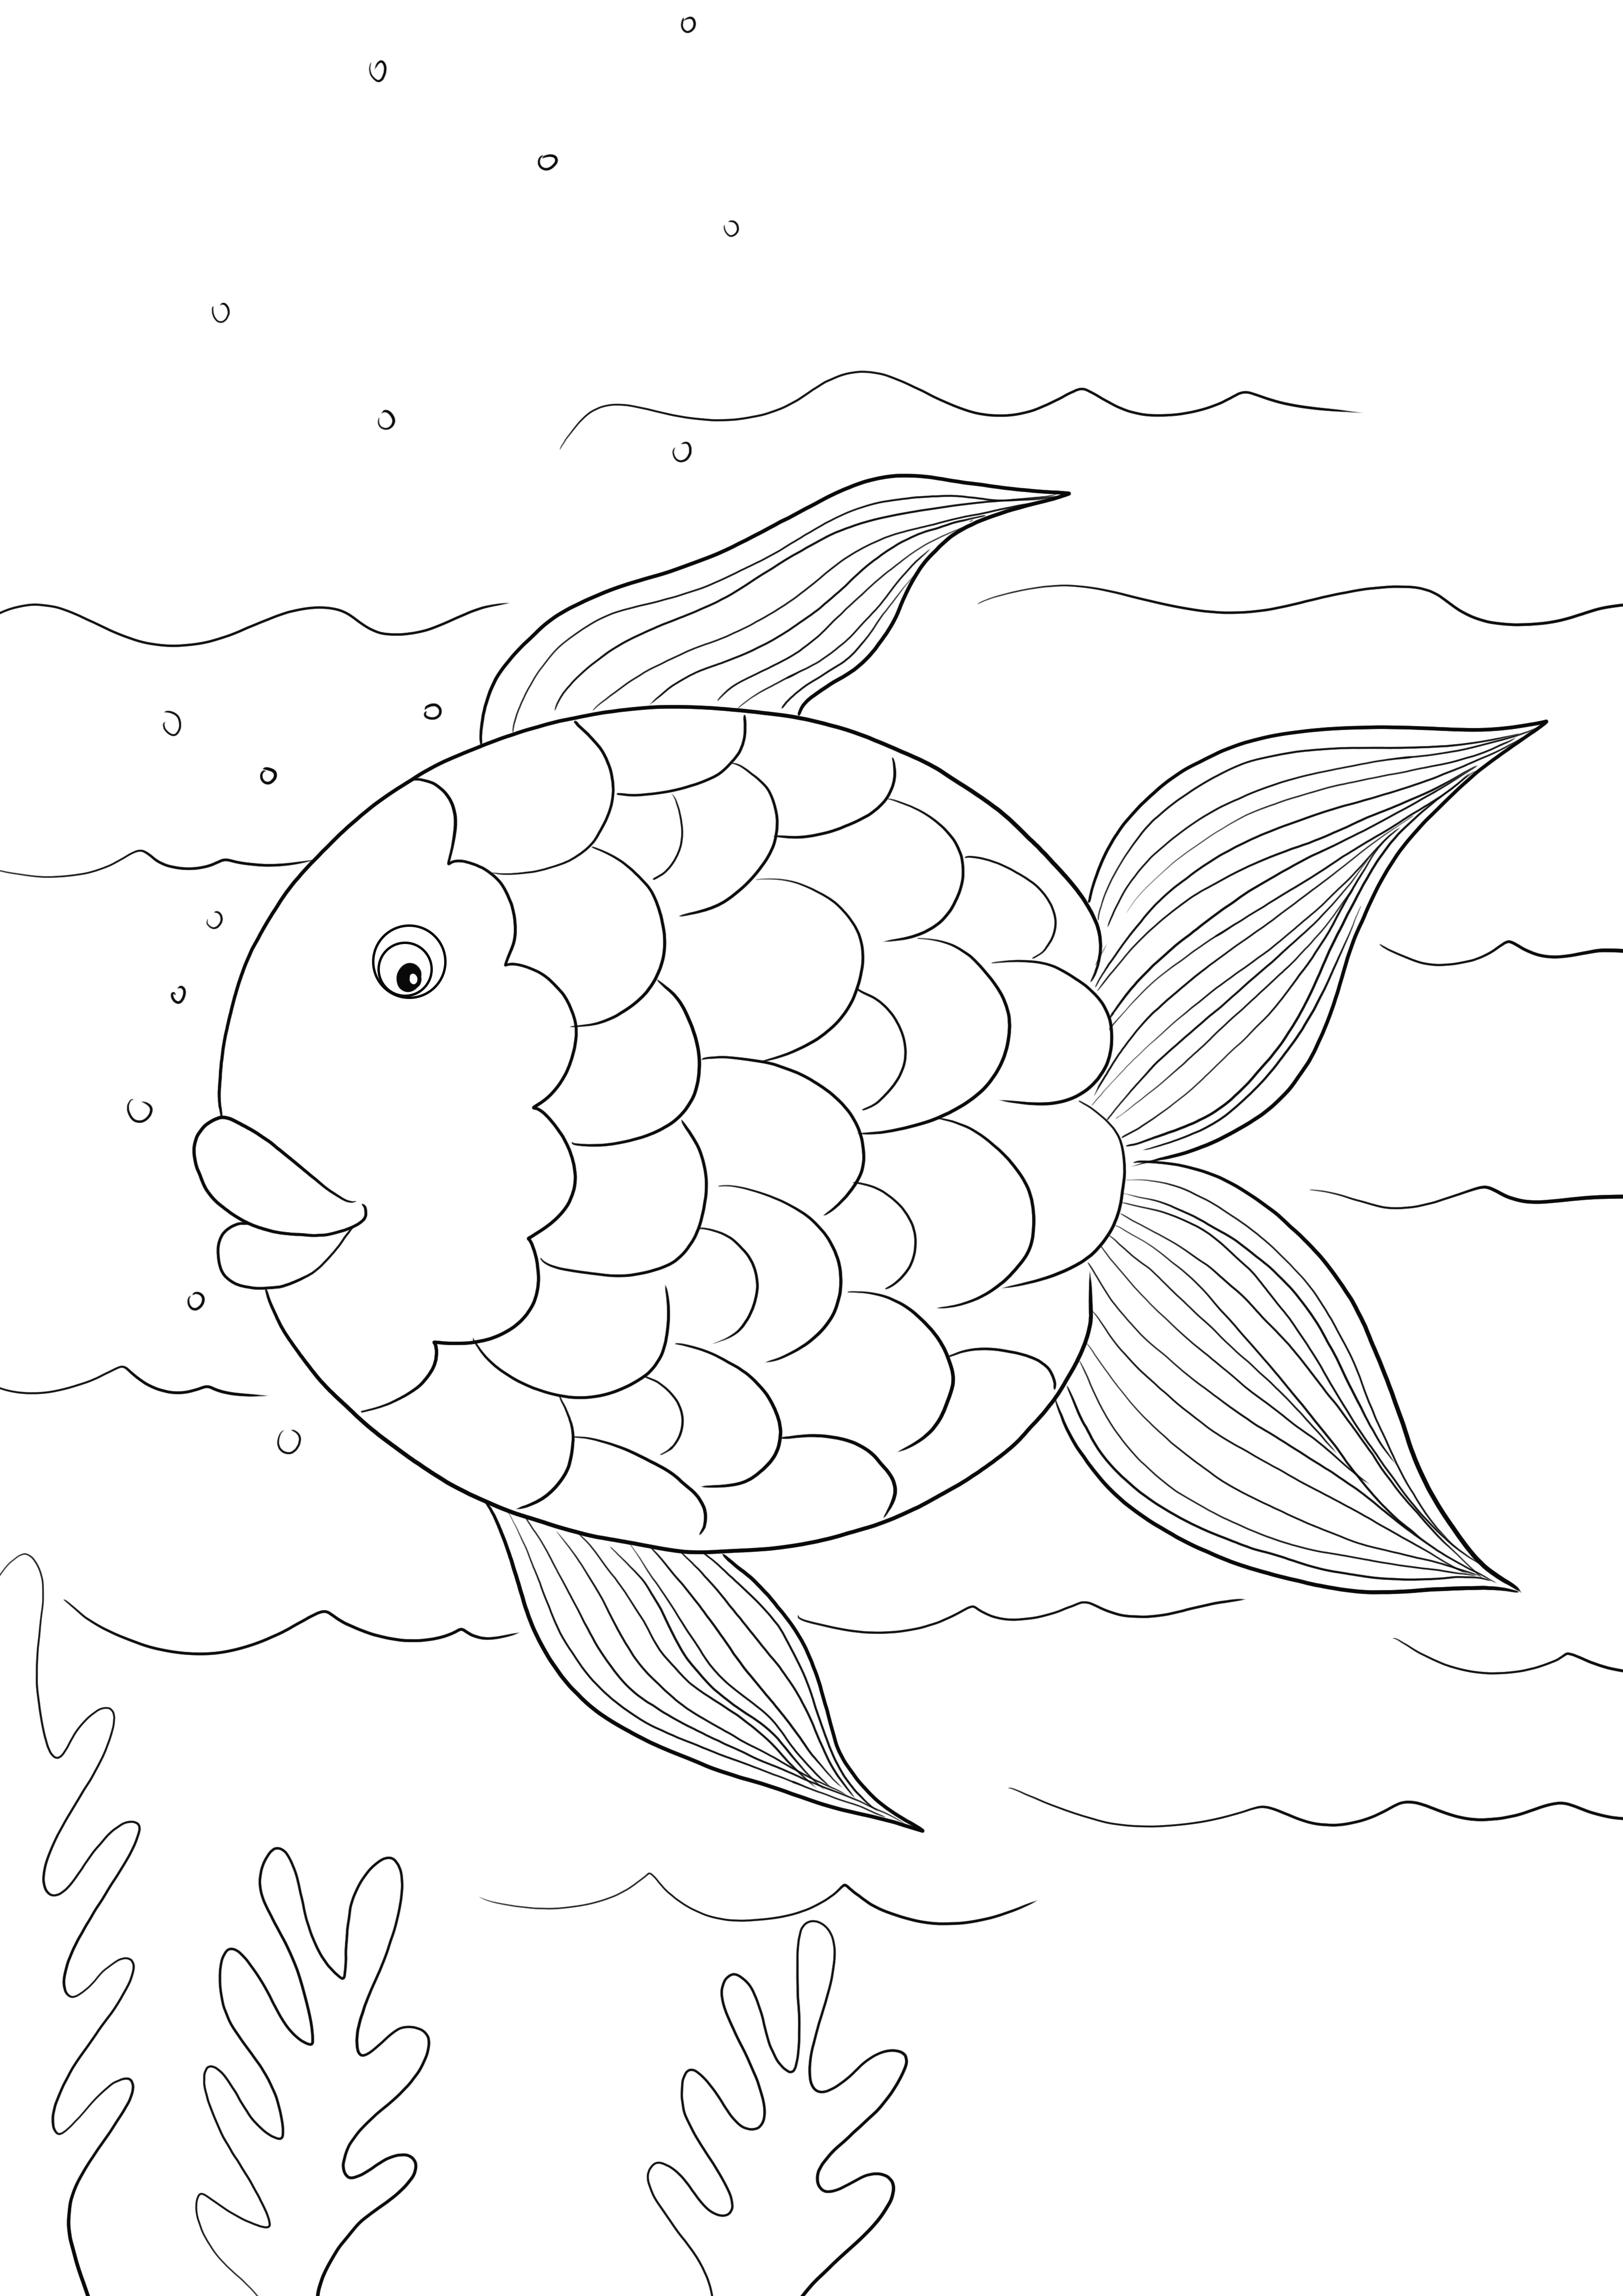 rainbow-fish-template-free-to-print-or-download-and-used-to-color-for-kids